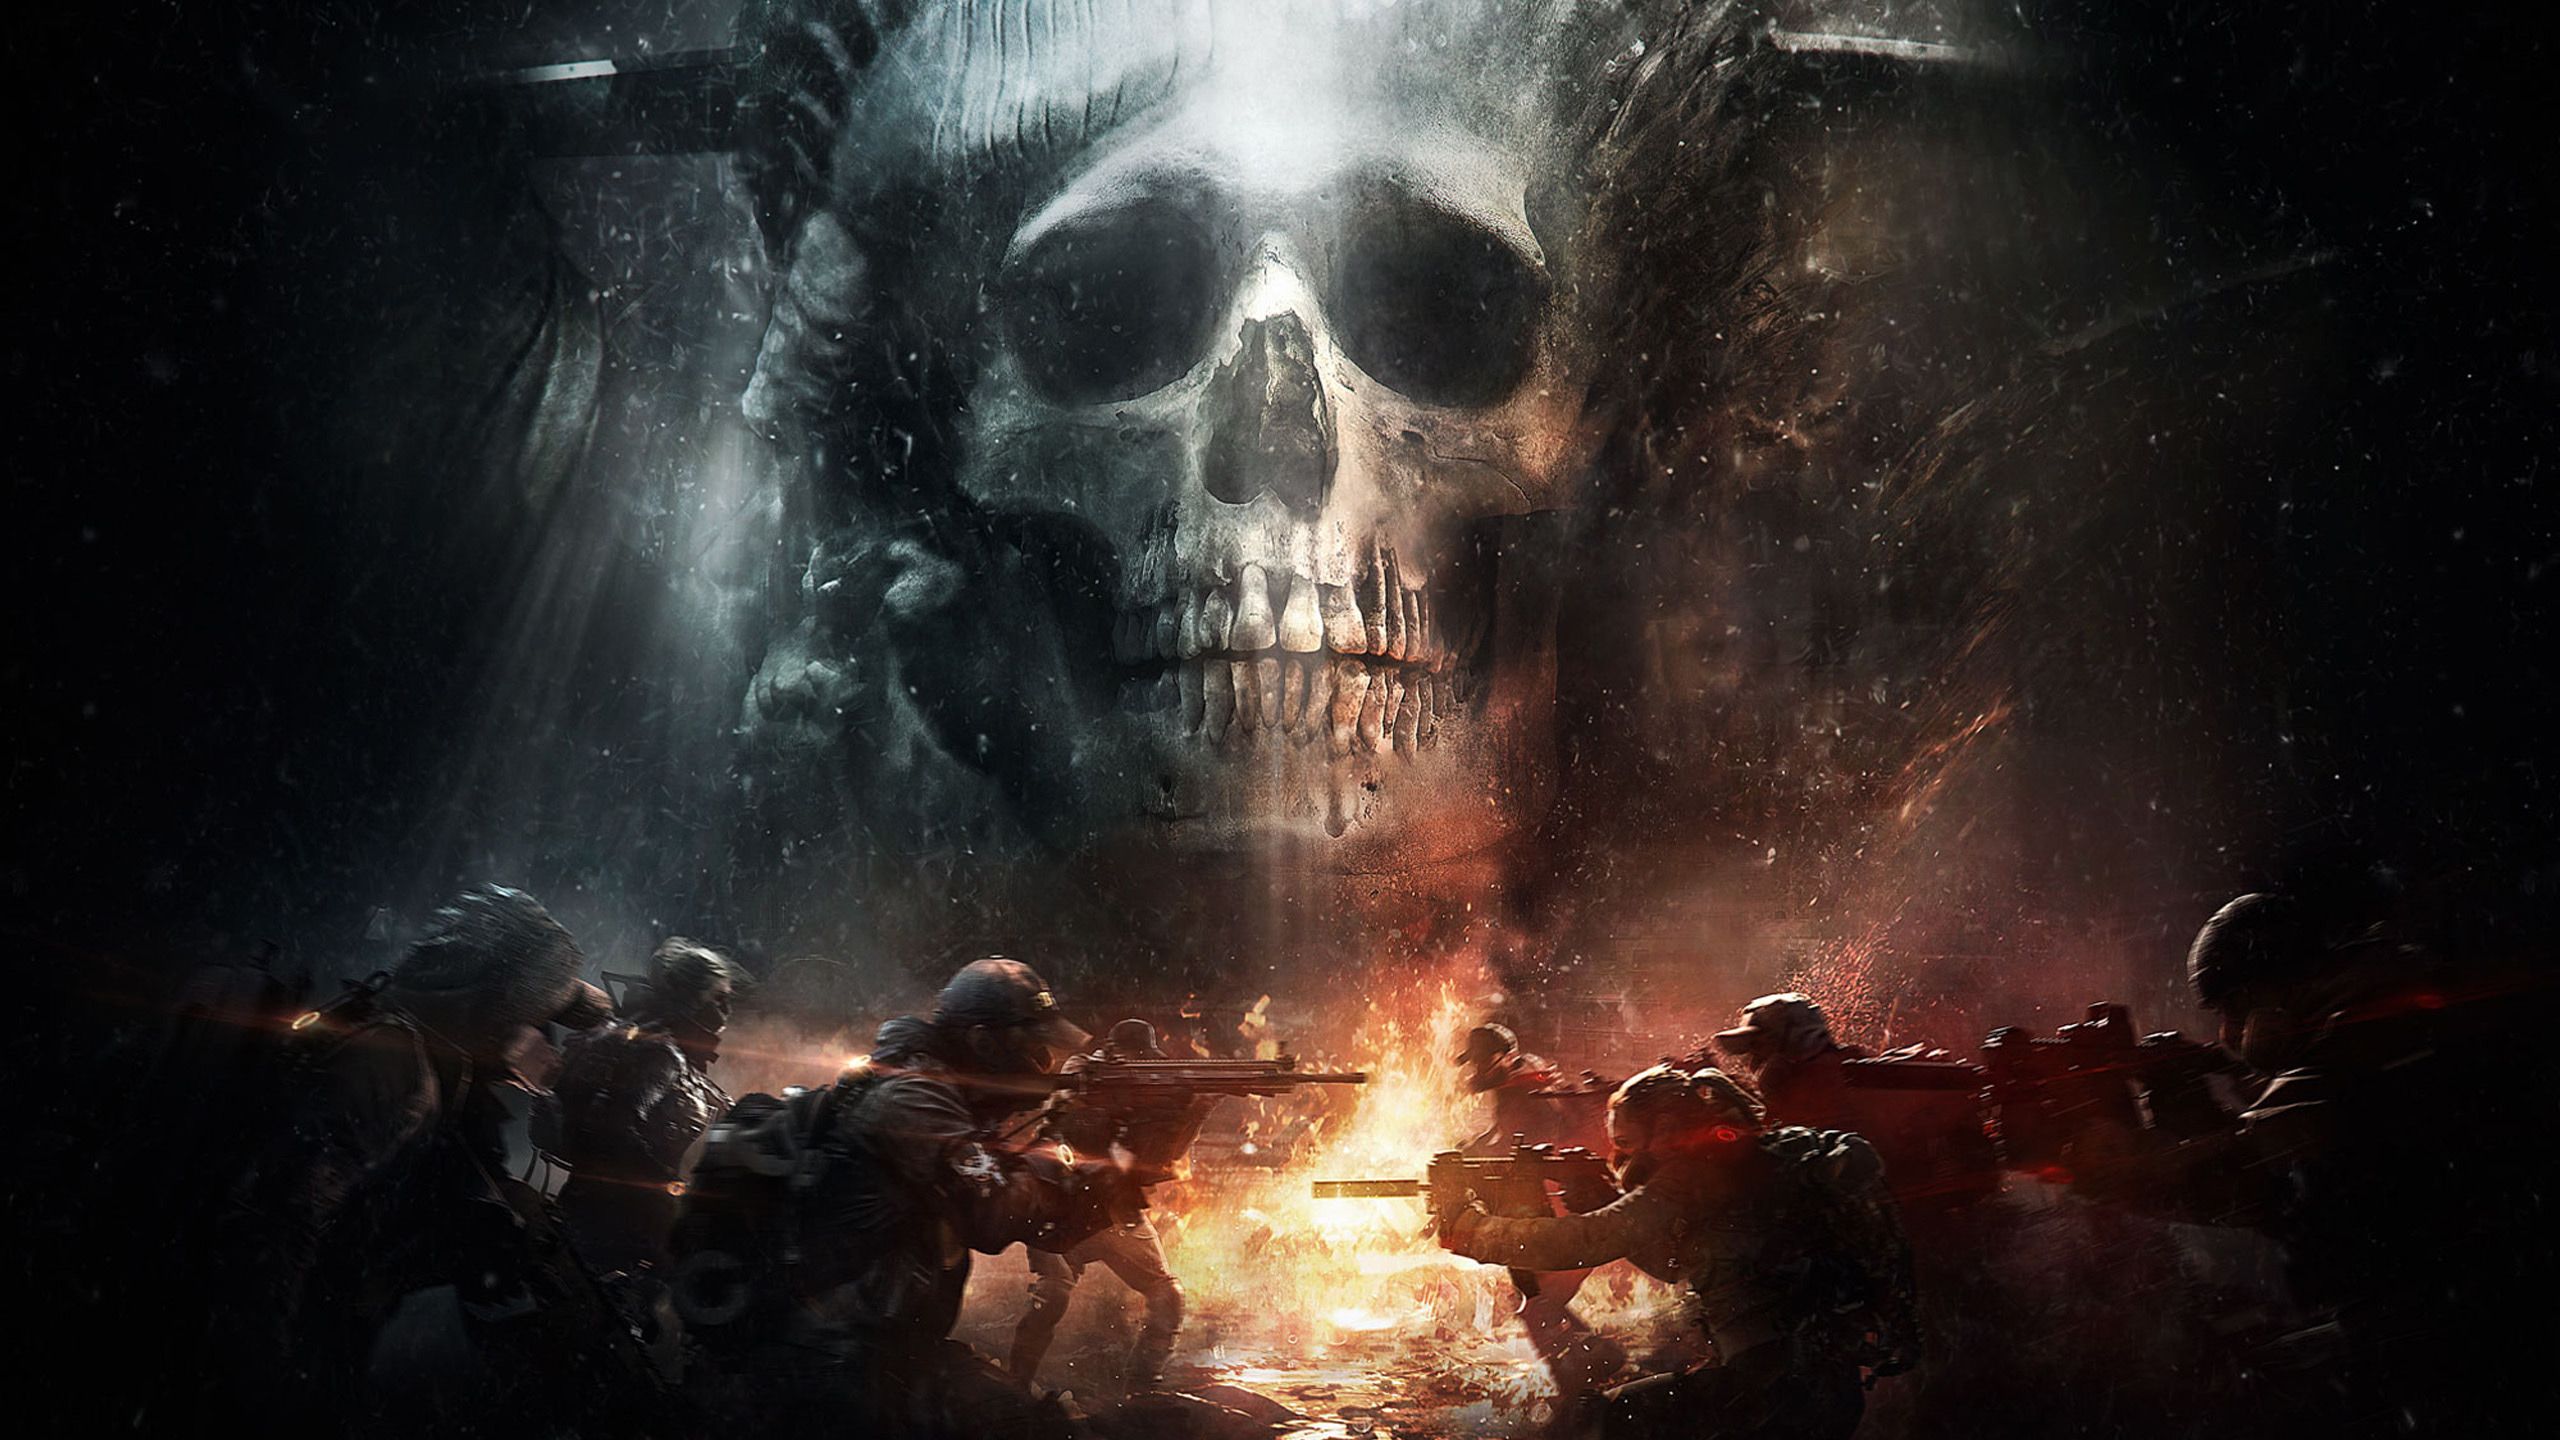 Download 2560x1440 wallpaper tom clancy's the division, game, skull, soldiers, dual wide, widescreen 16: widescreen, 2560x1440 HD image, background, 2772